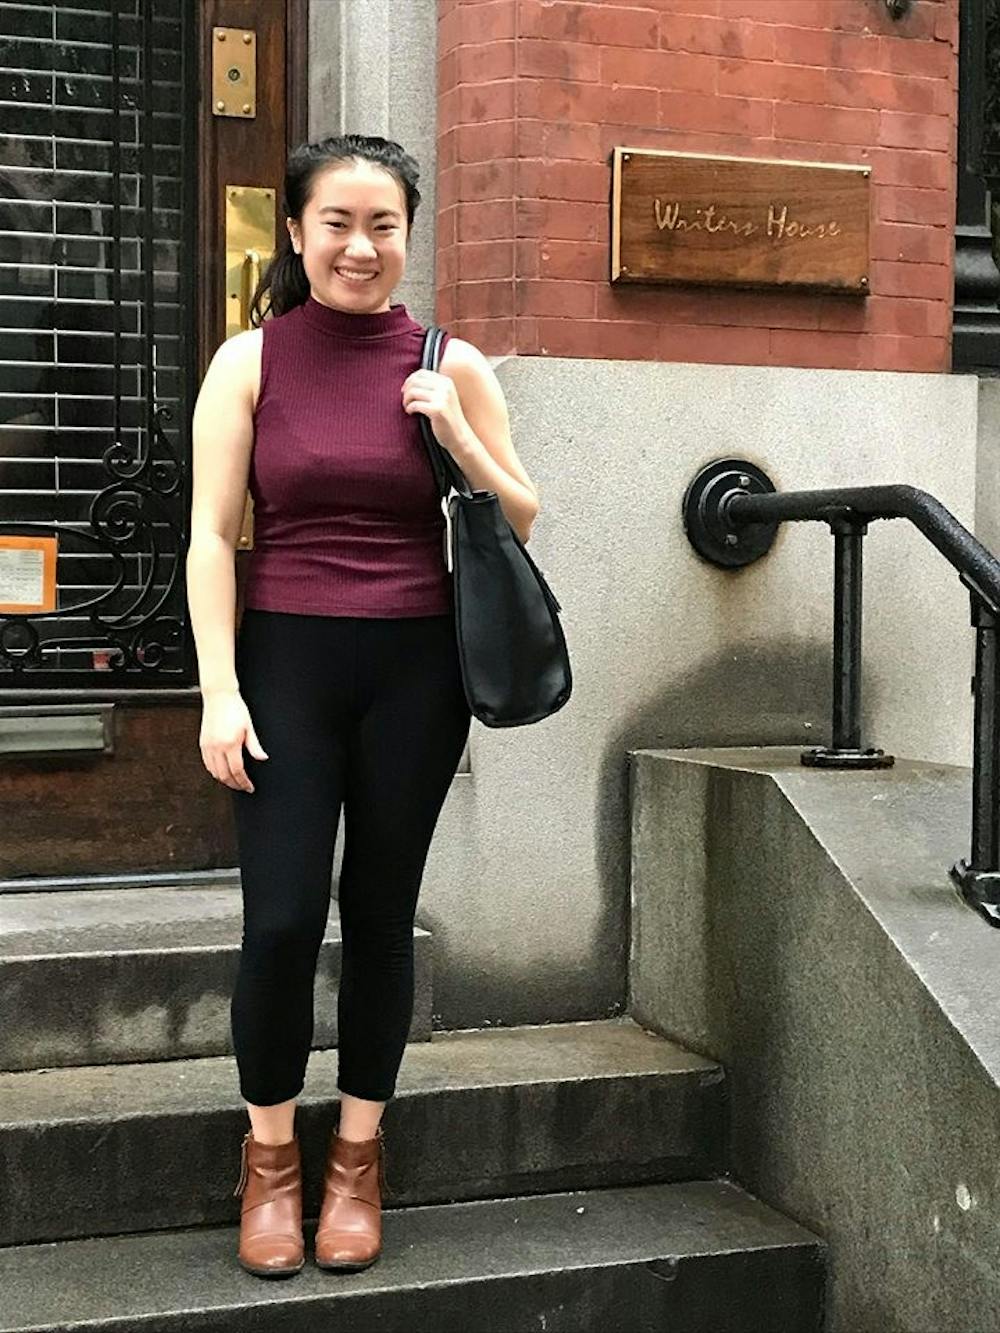 <p>Ball State graduate Natali Cavanagh in front of Writers House in New York City. Cavanagh interned at the literary agency her first semester of her senior year. <strong>Natali Cavanagh, Photo Provided&nbsp;</strong></p>